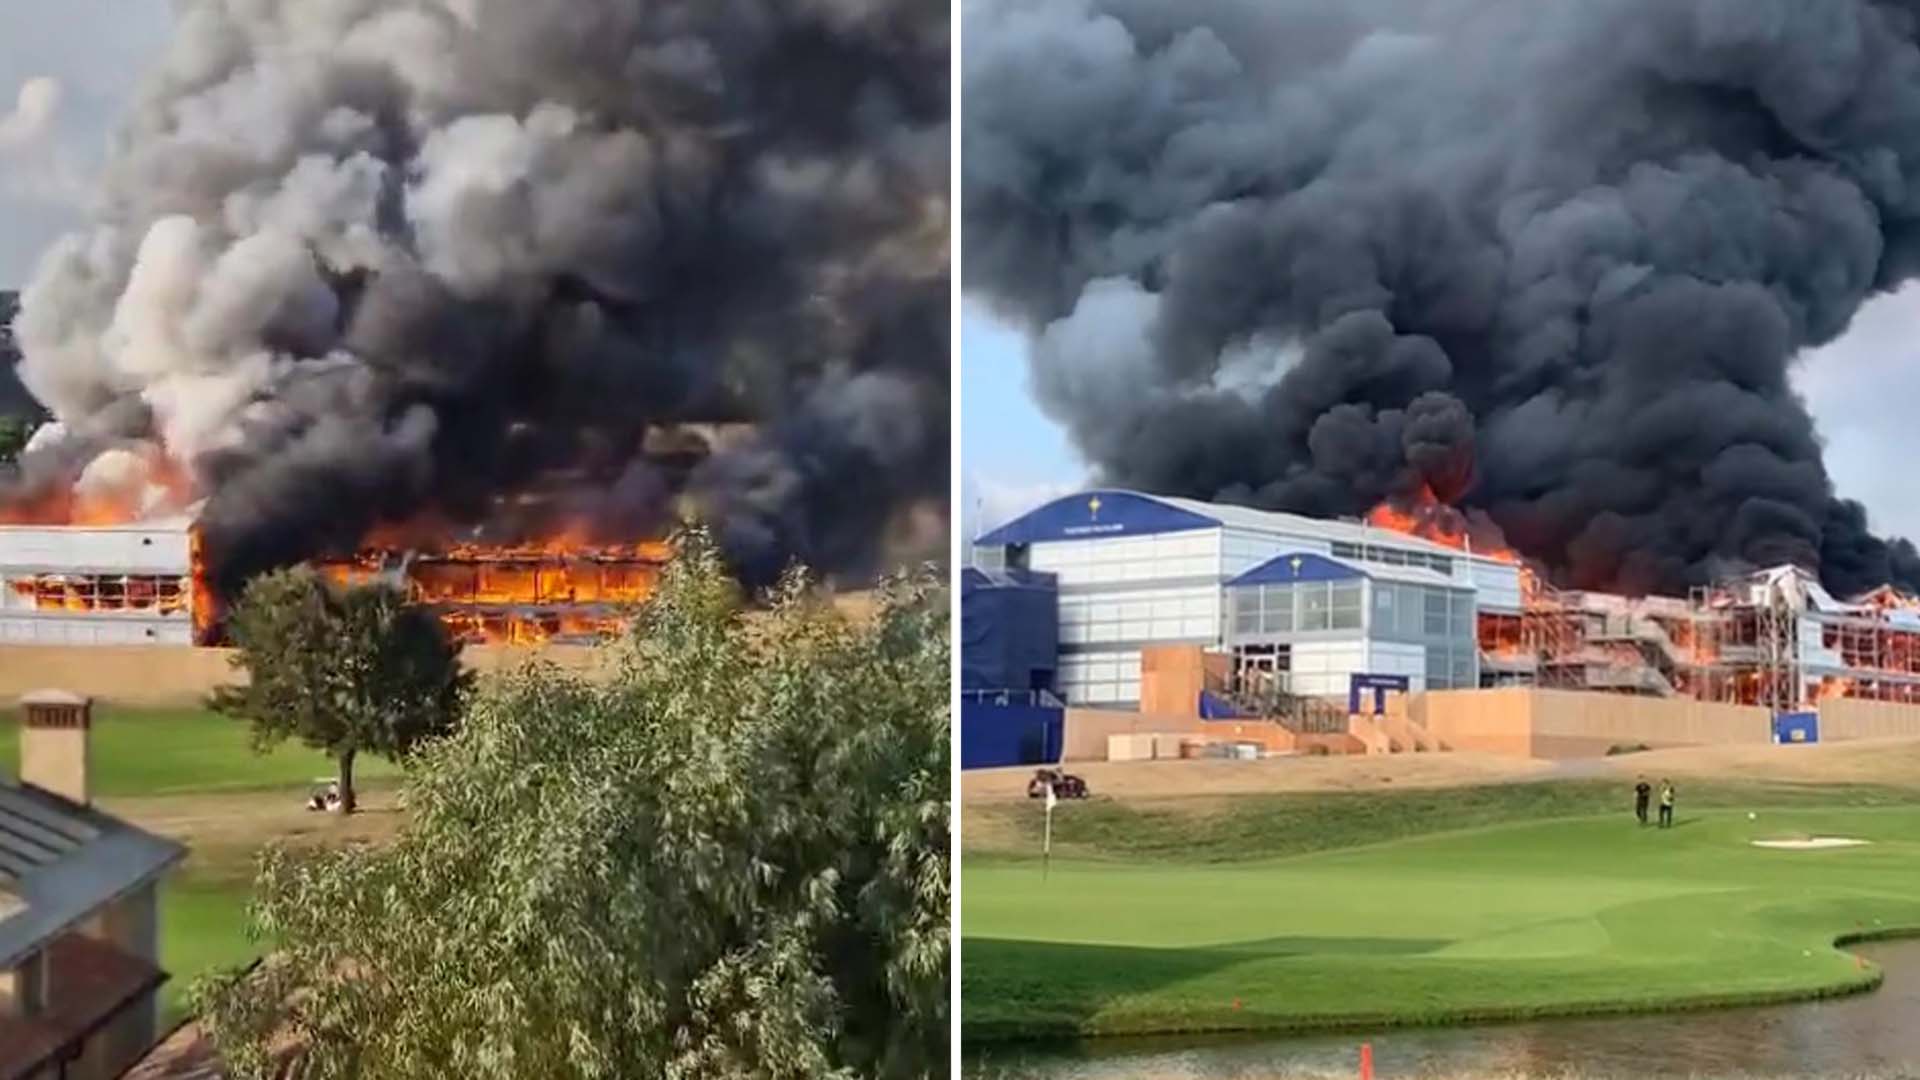 ryder-cup-golf-course-in-italy-engulfed-in-flames-marco-simone-golf-and-country-club-suffers-fire